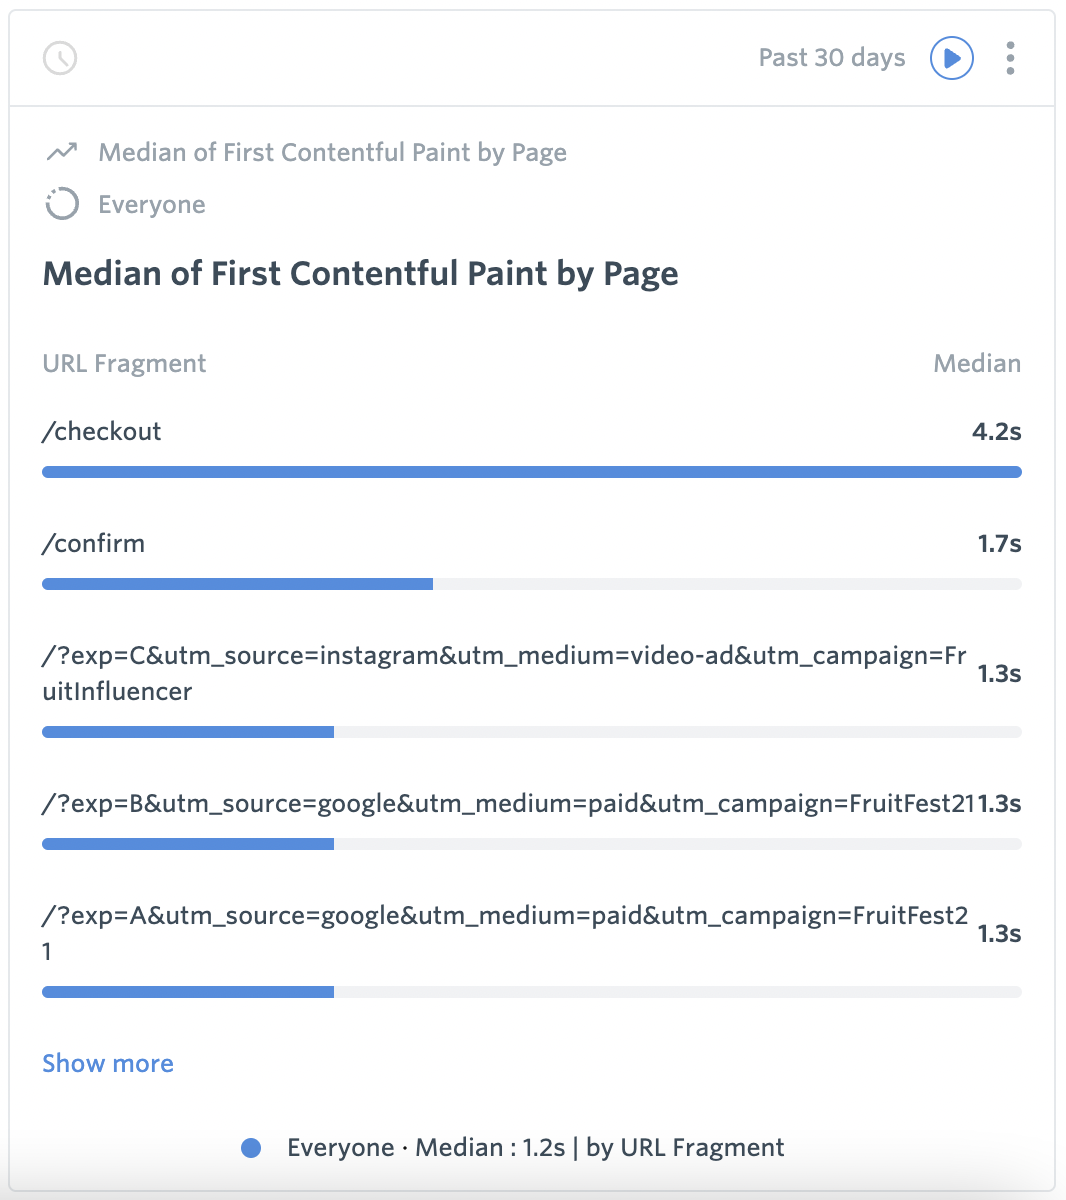 Median_of_First_Contentful_Paint_by_Page.png